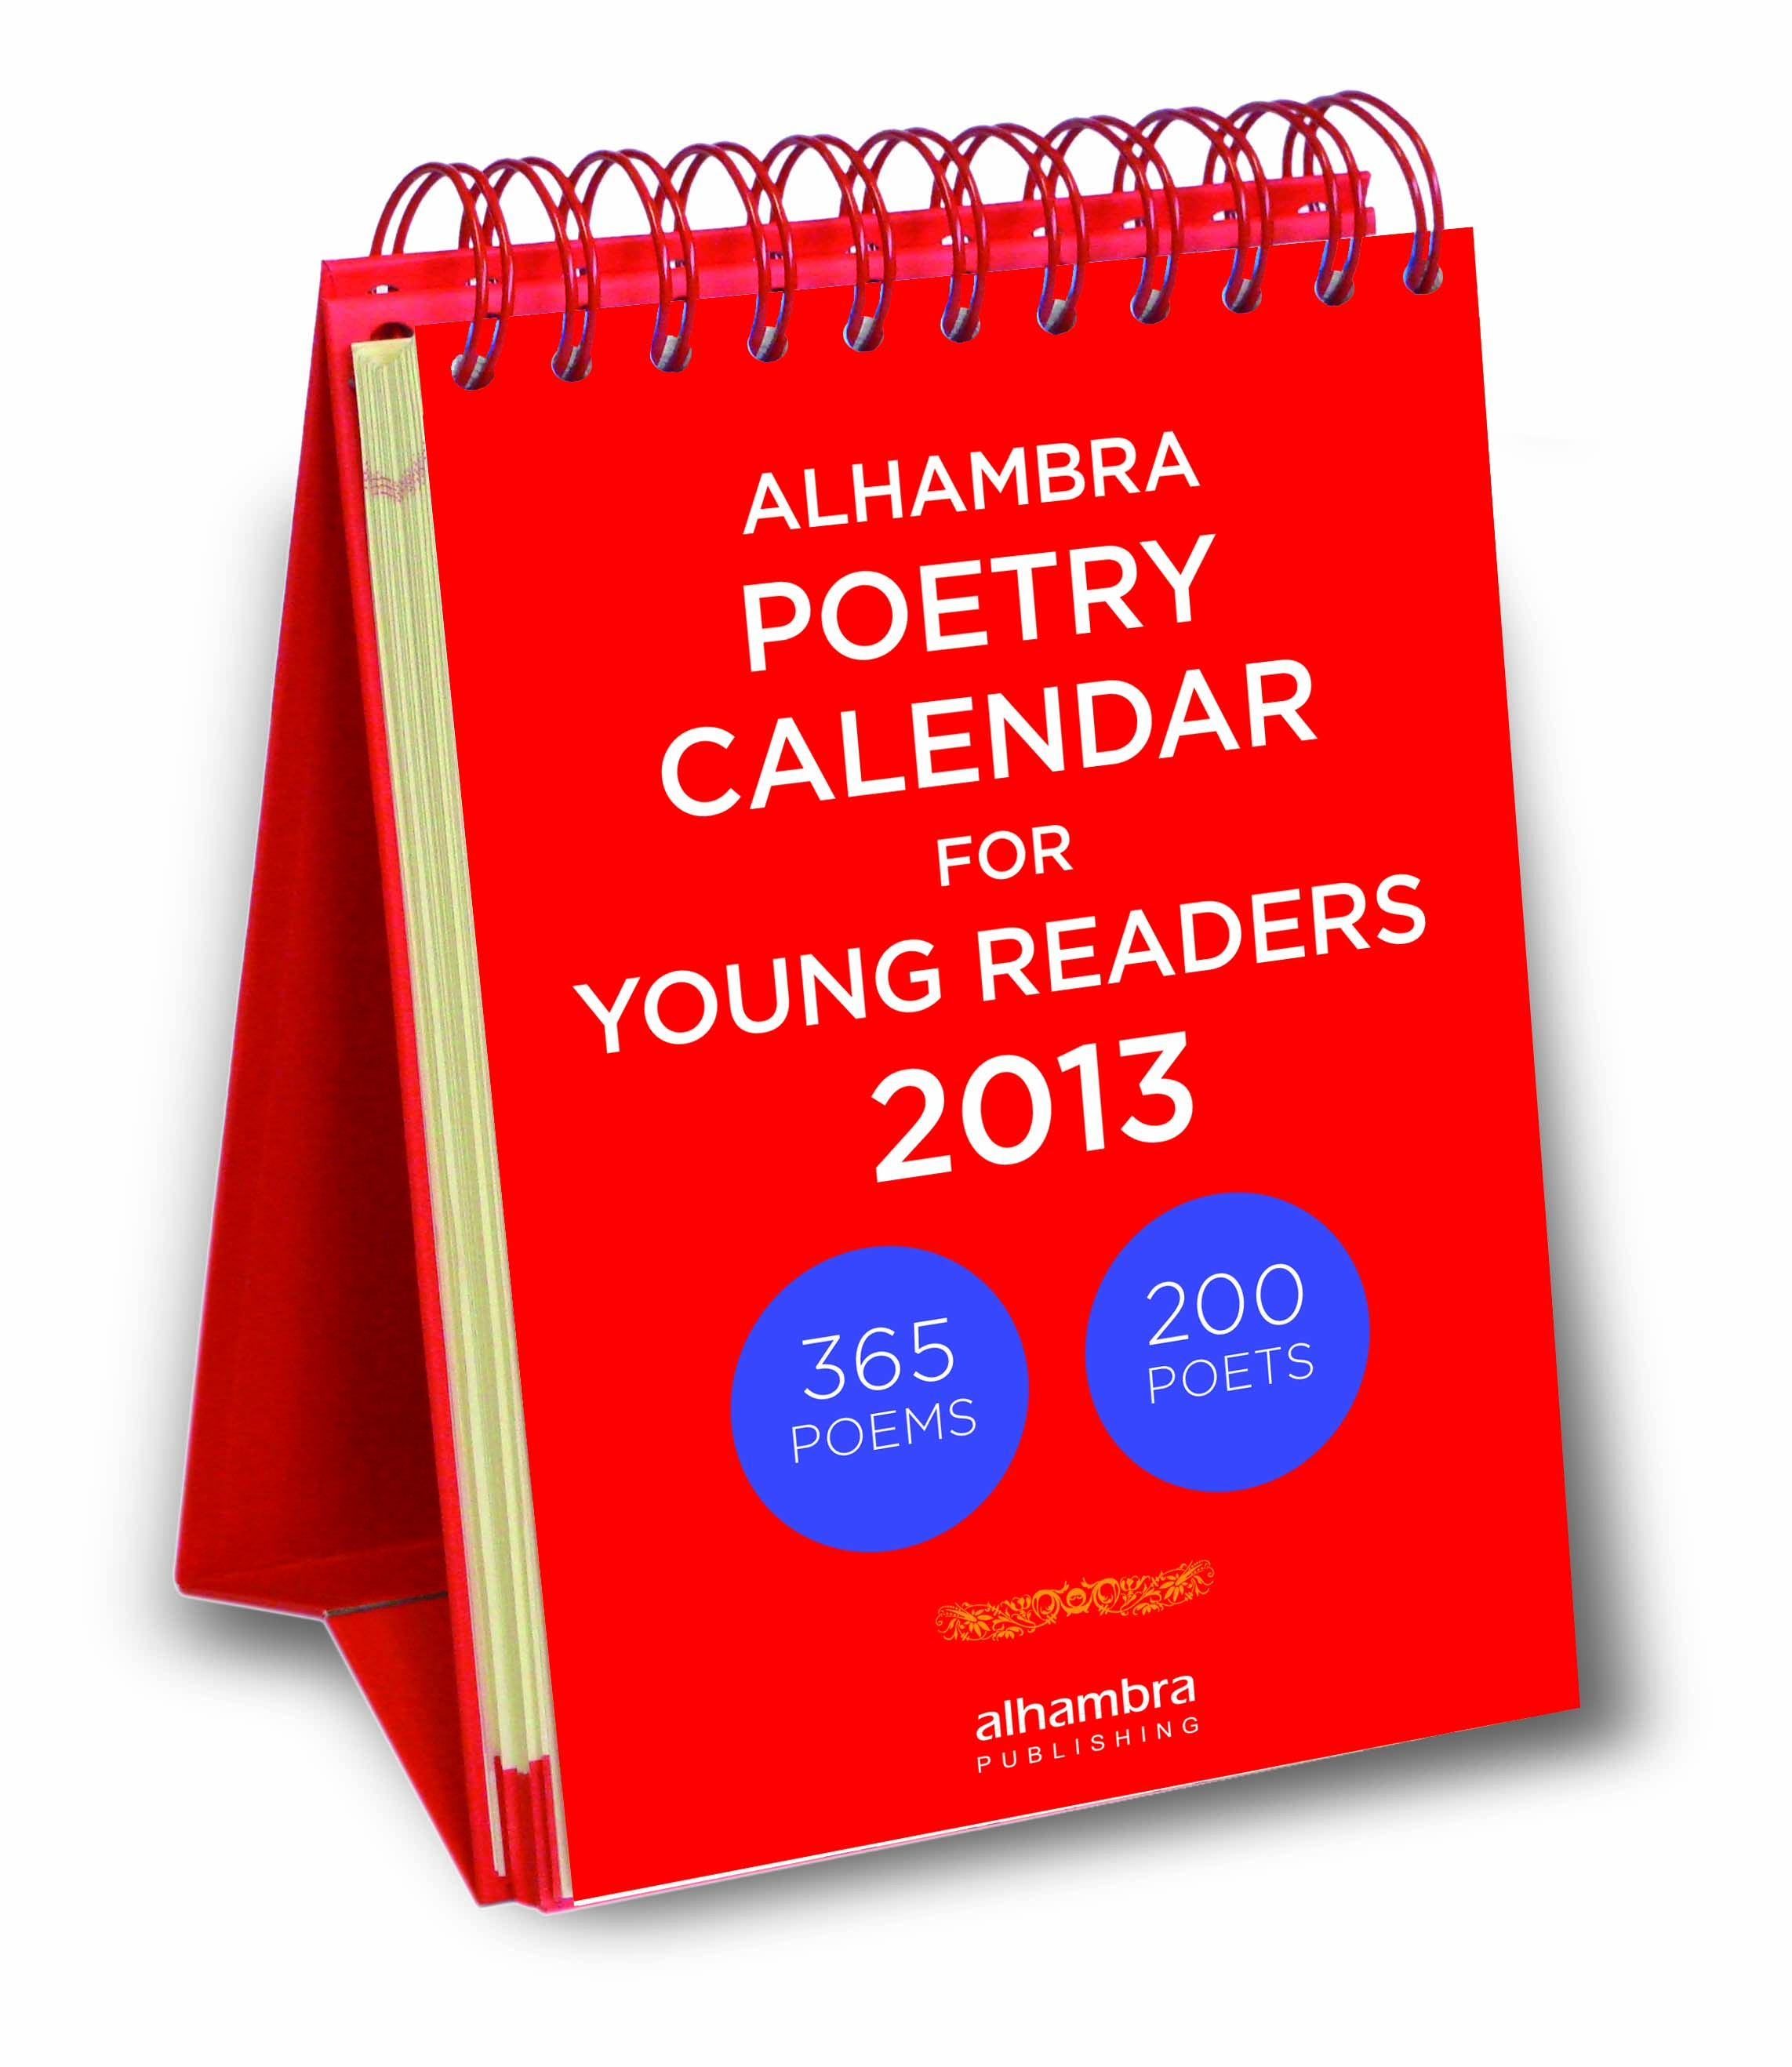 Alhambra Poetry Calendar for Young Readers 2013.